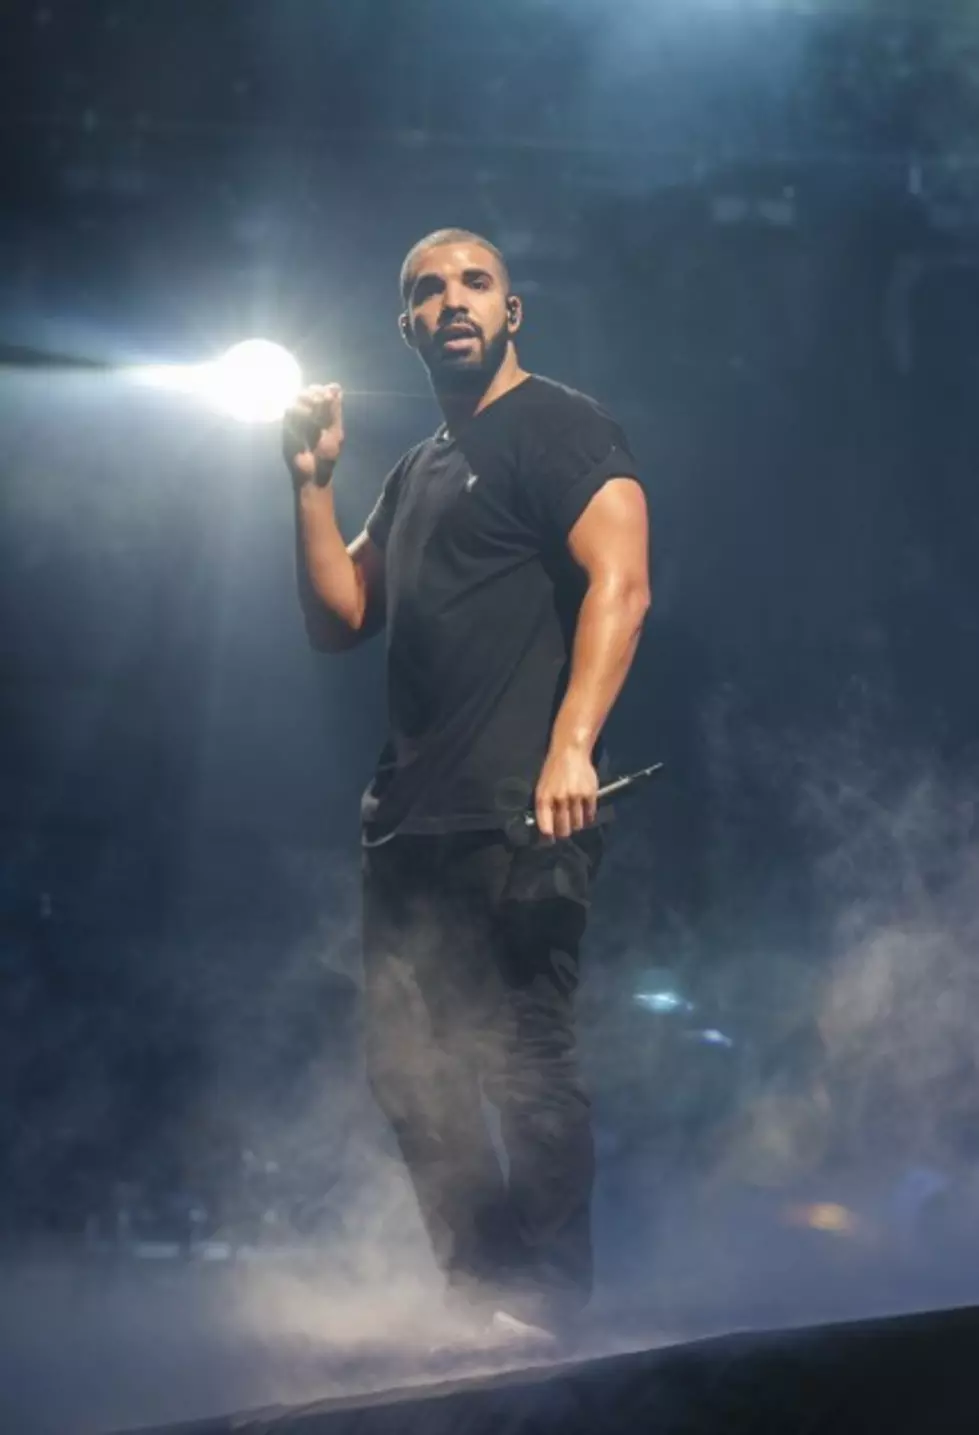 [VIDEO] See Drake&#8217;s ResponseTo Crowd Chanting &#8220;F Meek Mill&#8221; at OVO Fest in Toronto